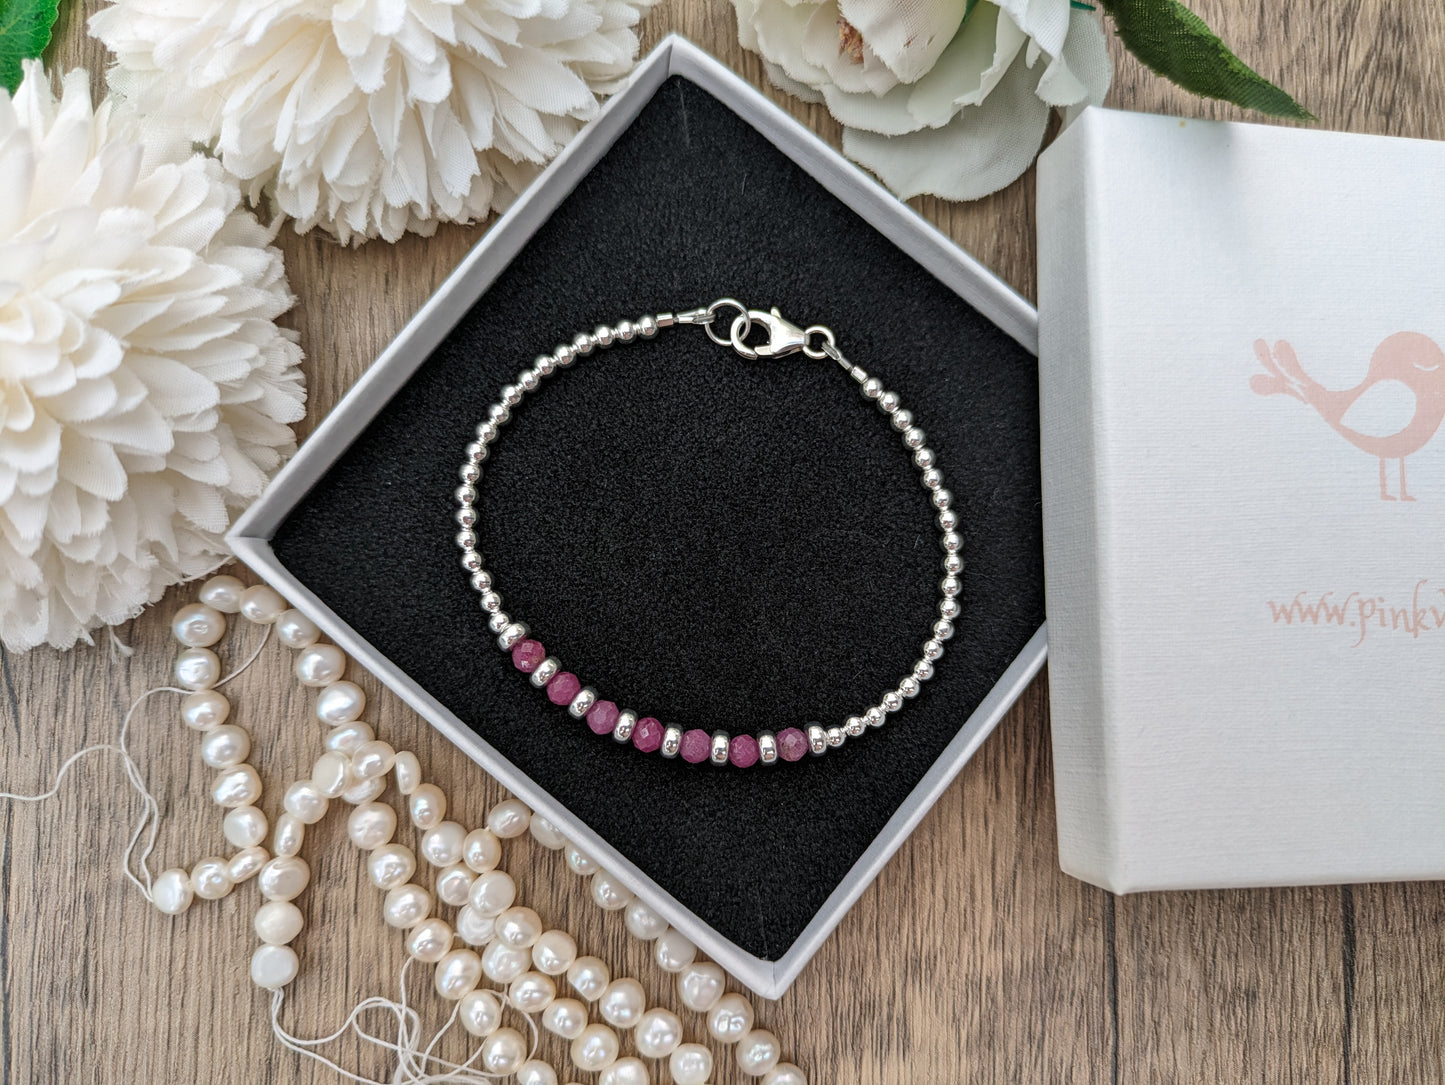 Ruby bracelet - personalise with any initial, number or zodiac sign.